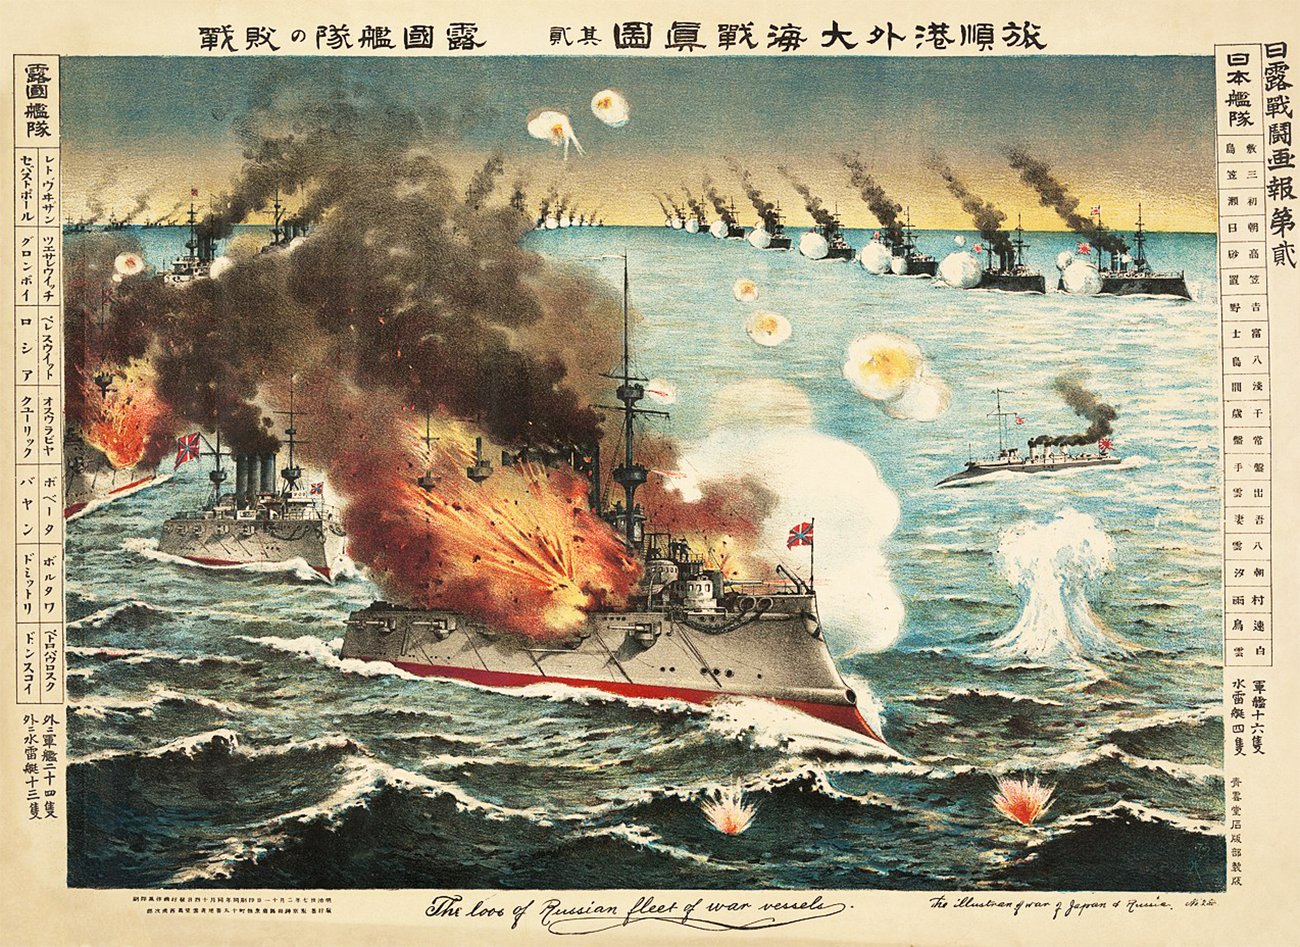 This illustration depicts the Battle of Port Arthur during the Russo-Japanese War, where a Russian battleship is shown exploding from bombardment by Japanese battleships. On the right, a fleet of Japanese ships fires upon Russian battleships on the left in a surprise naval attack.